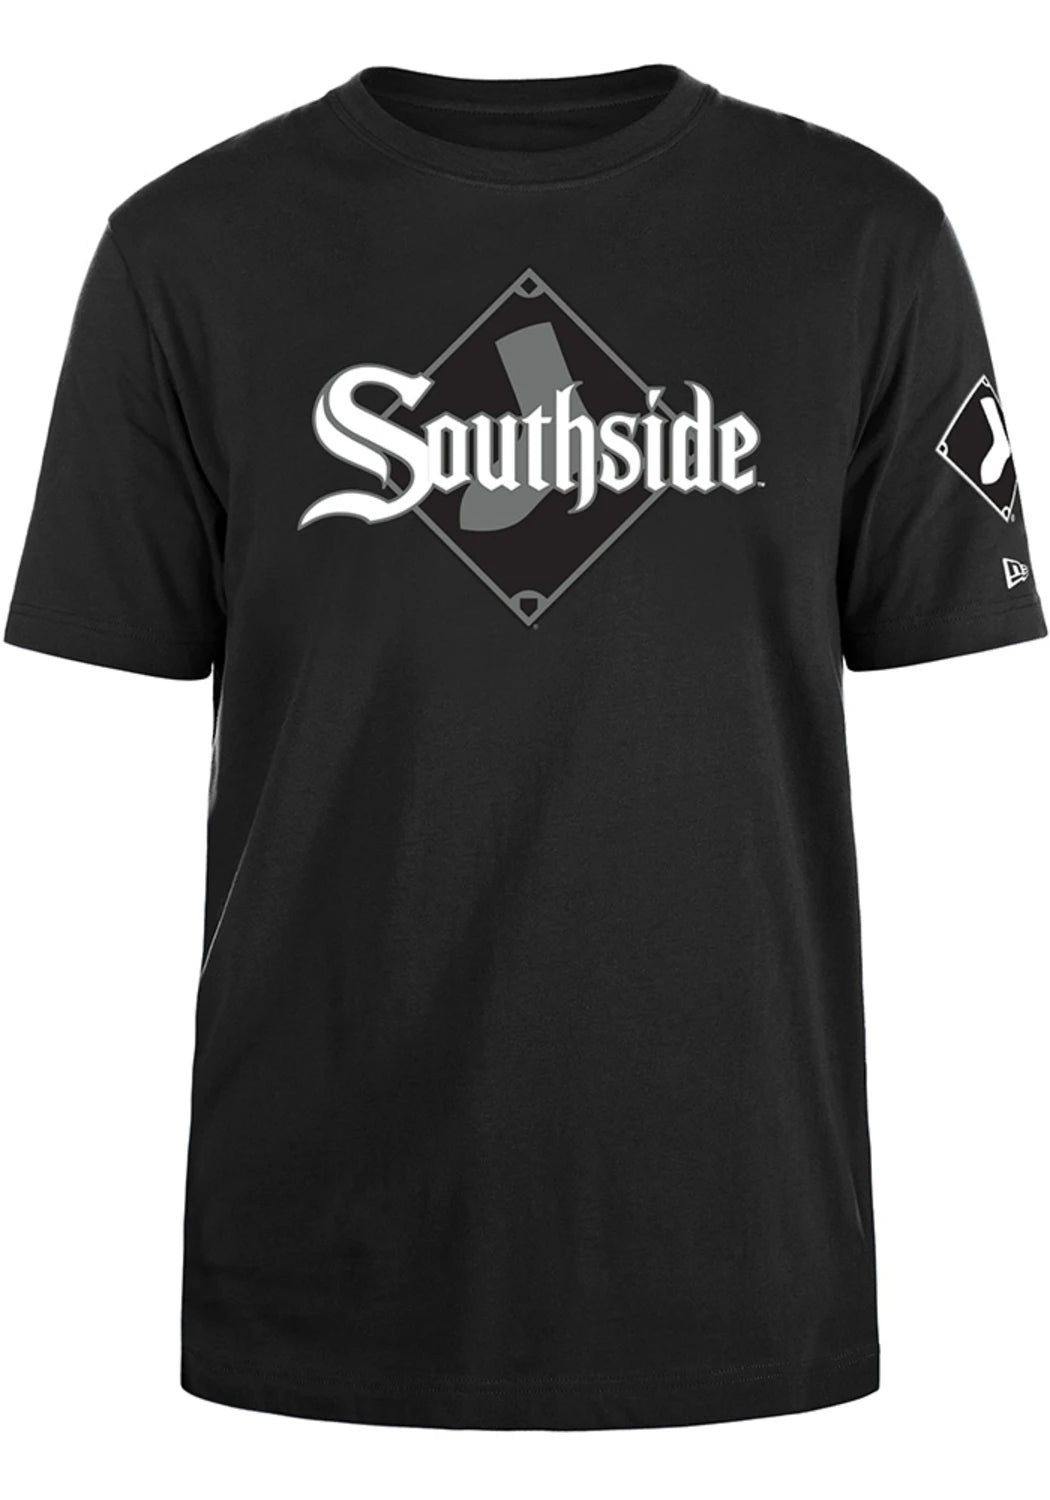 Chicago White Sox Southside City Connect Wordmark Shirt